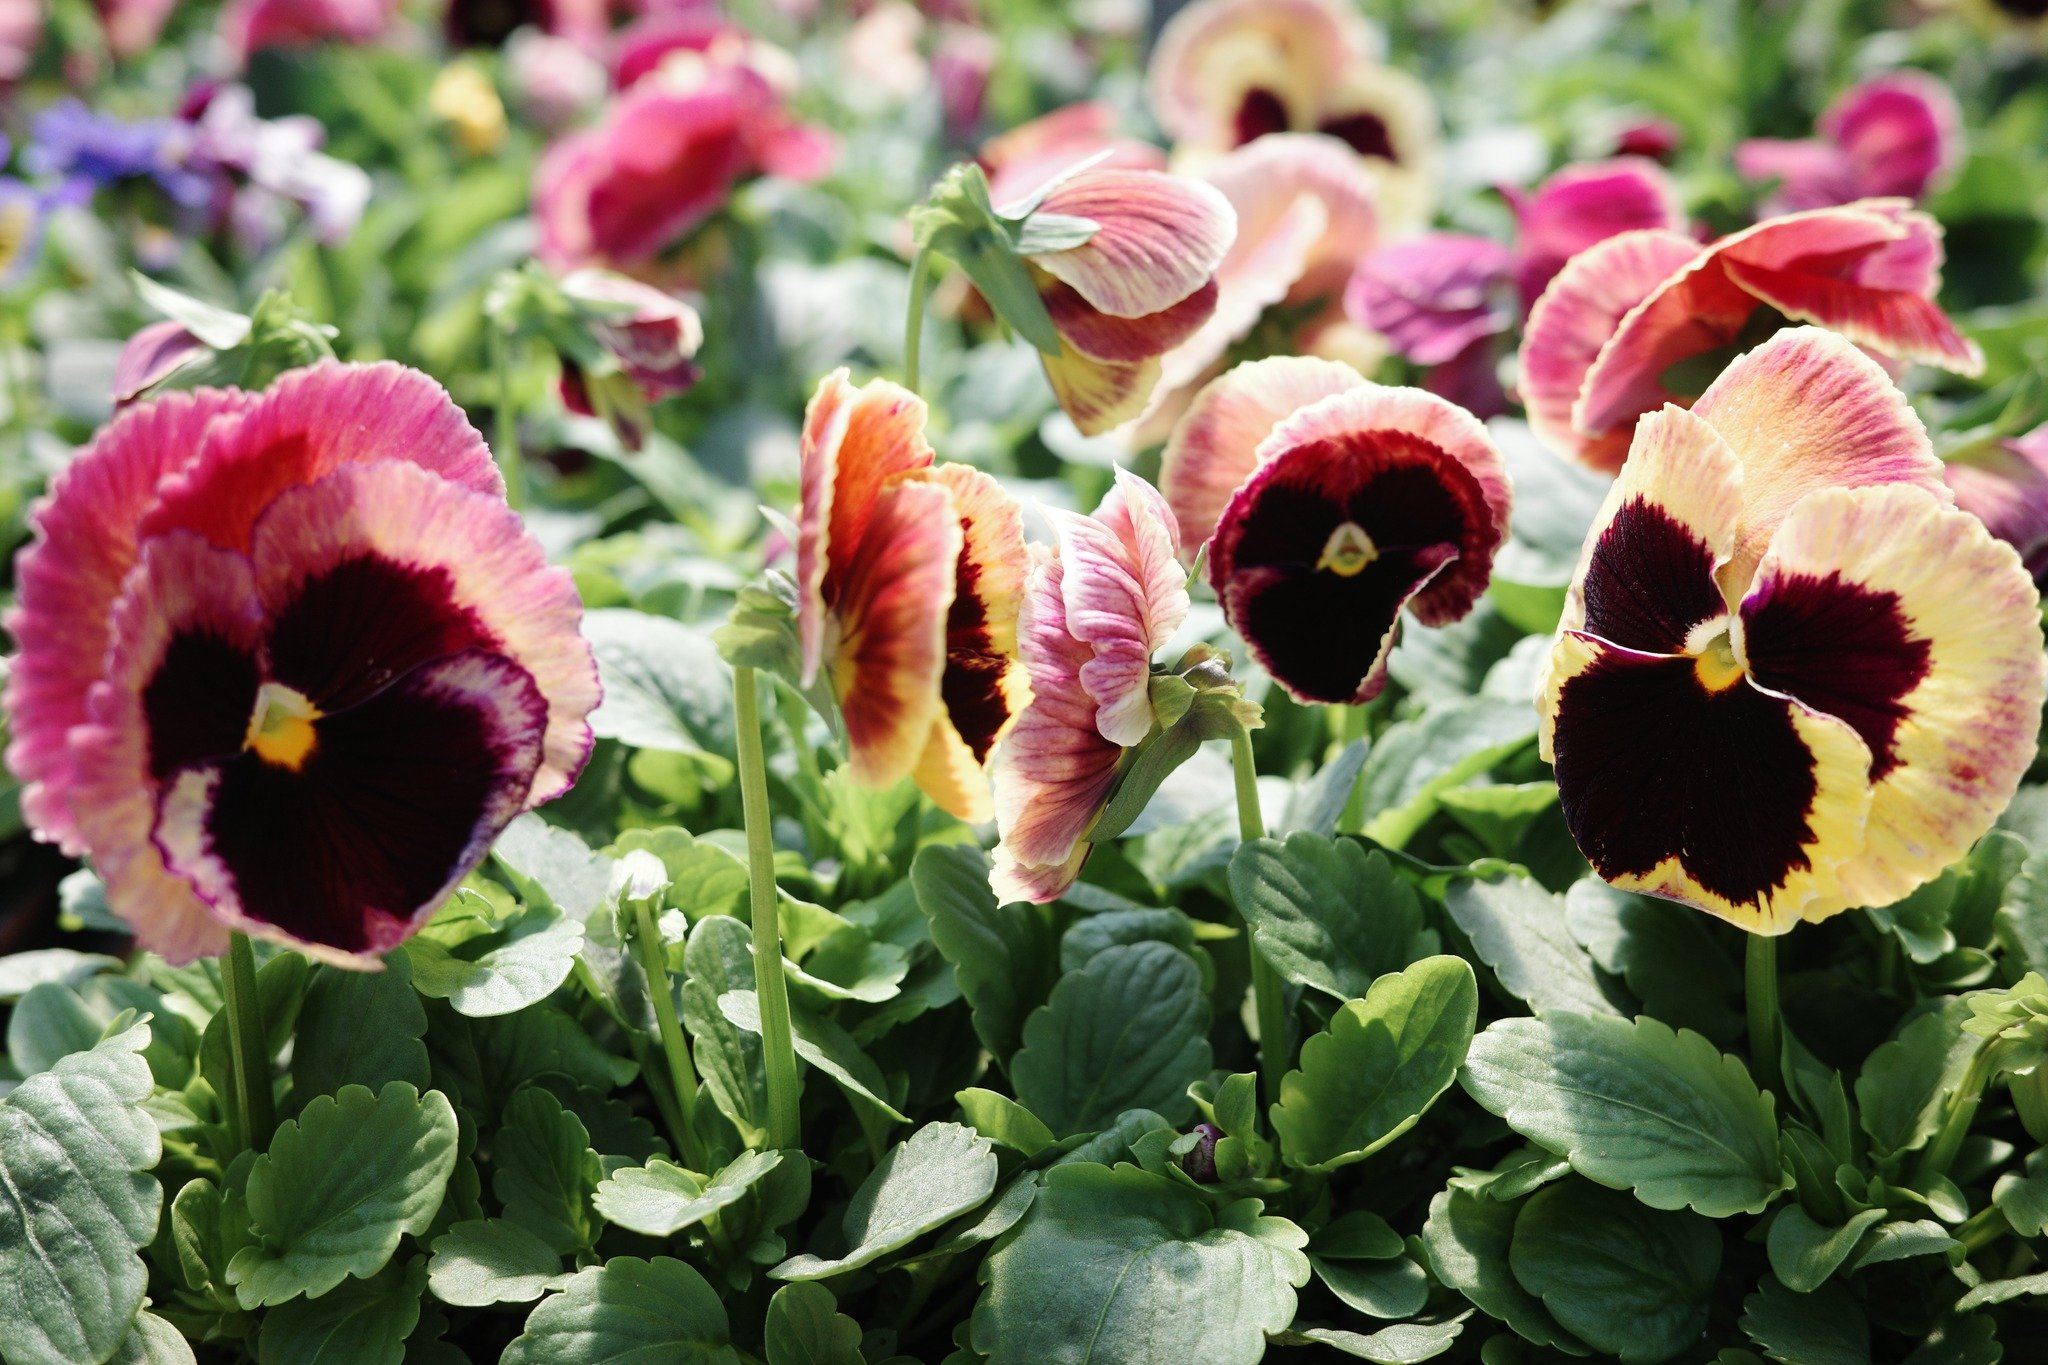 These Matrix Sunrise Pansies are looking rather painterly in the early morning sun!